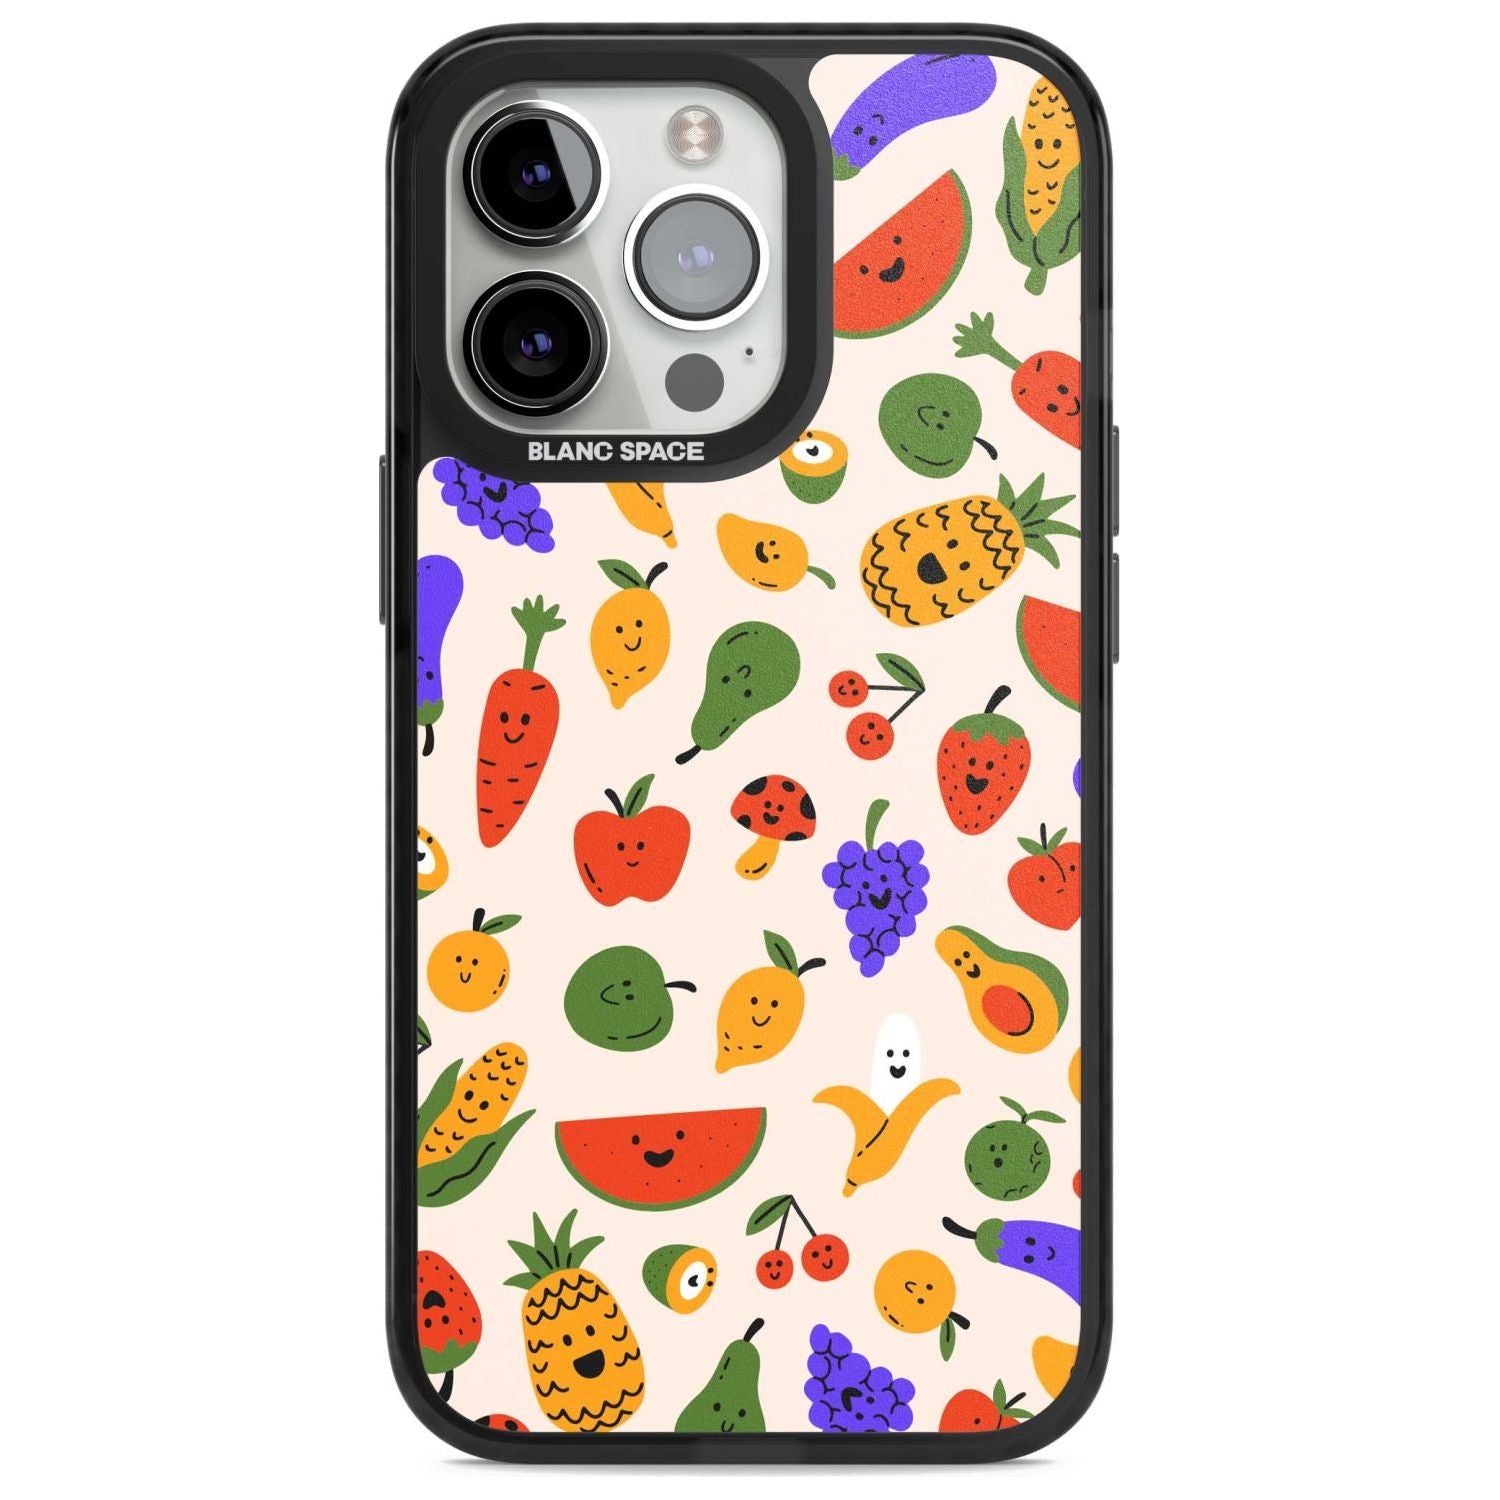 Mixed Kawaii Food Icons - Solid Phone Case iPhone 15 Pro Max / Magsafe Black Impact Case,iPhone 15 Pro / Magsafe Black Impact Case,iPhone 14 Pro Max / Magsafe Black Impact Case,iPhone 14 Pro / Magsafe Black Impact Case,iPhone 13 Pro / Magsafe Black Impact Case Blanc Space